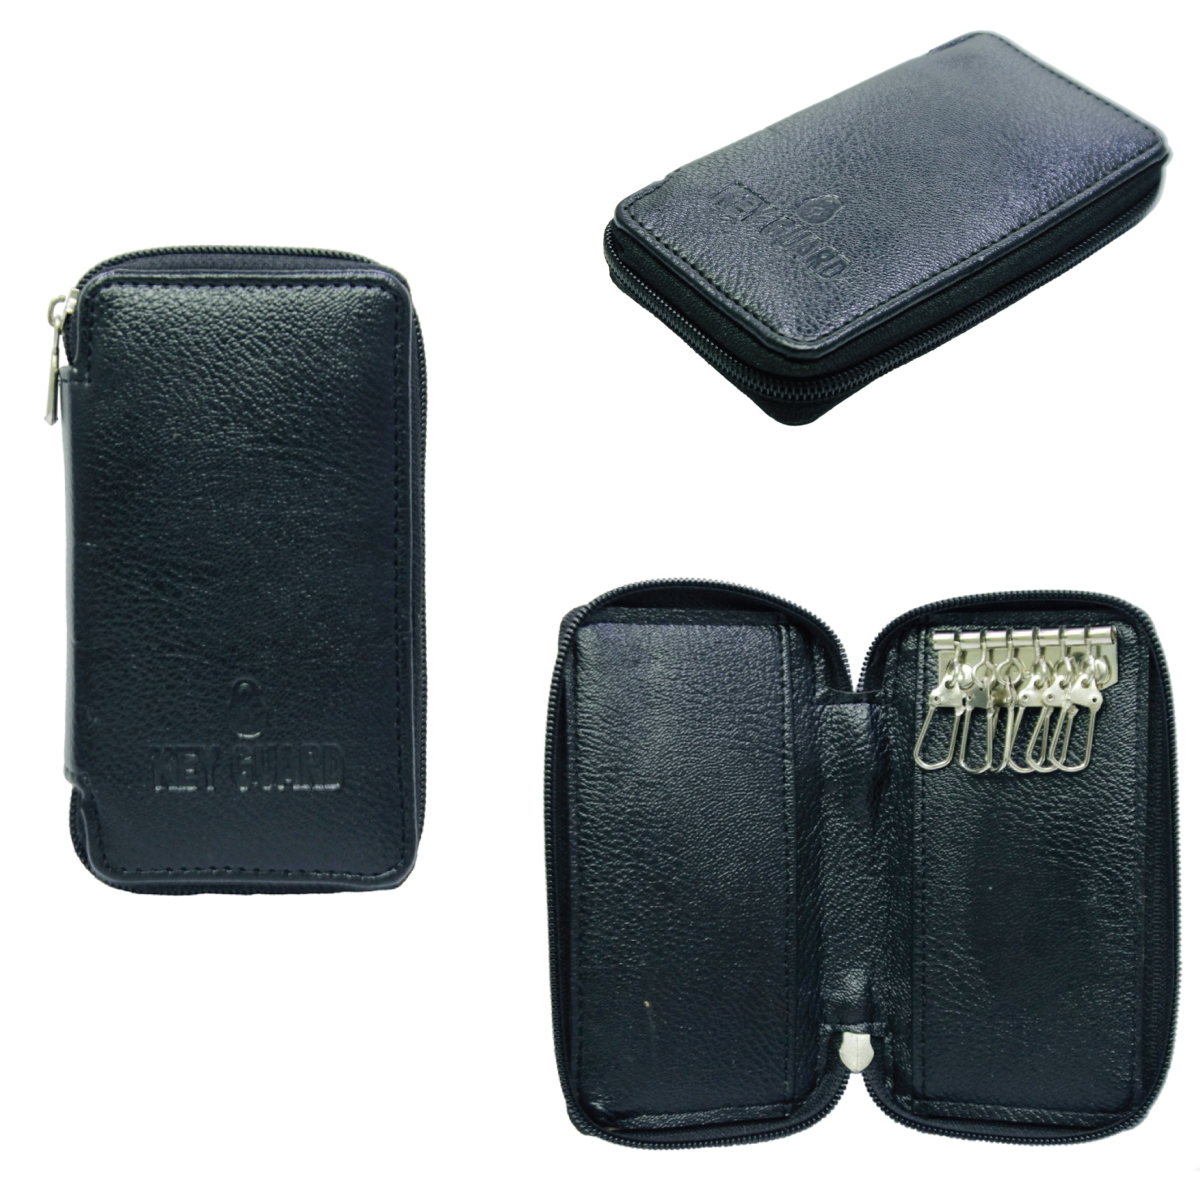 Black 5 Inch Key Holder Guard Case - For Office Use, Personal Use, Corporate Gifting, Return Gift - JAKGBK003